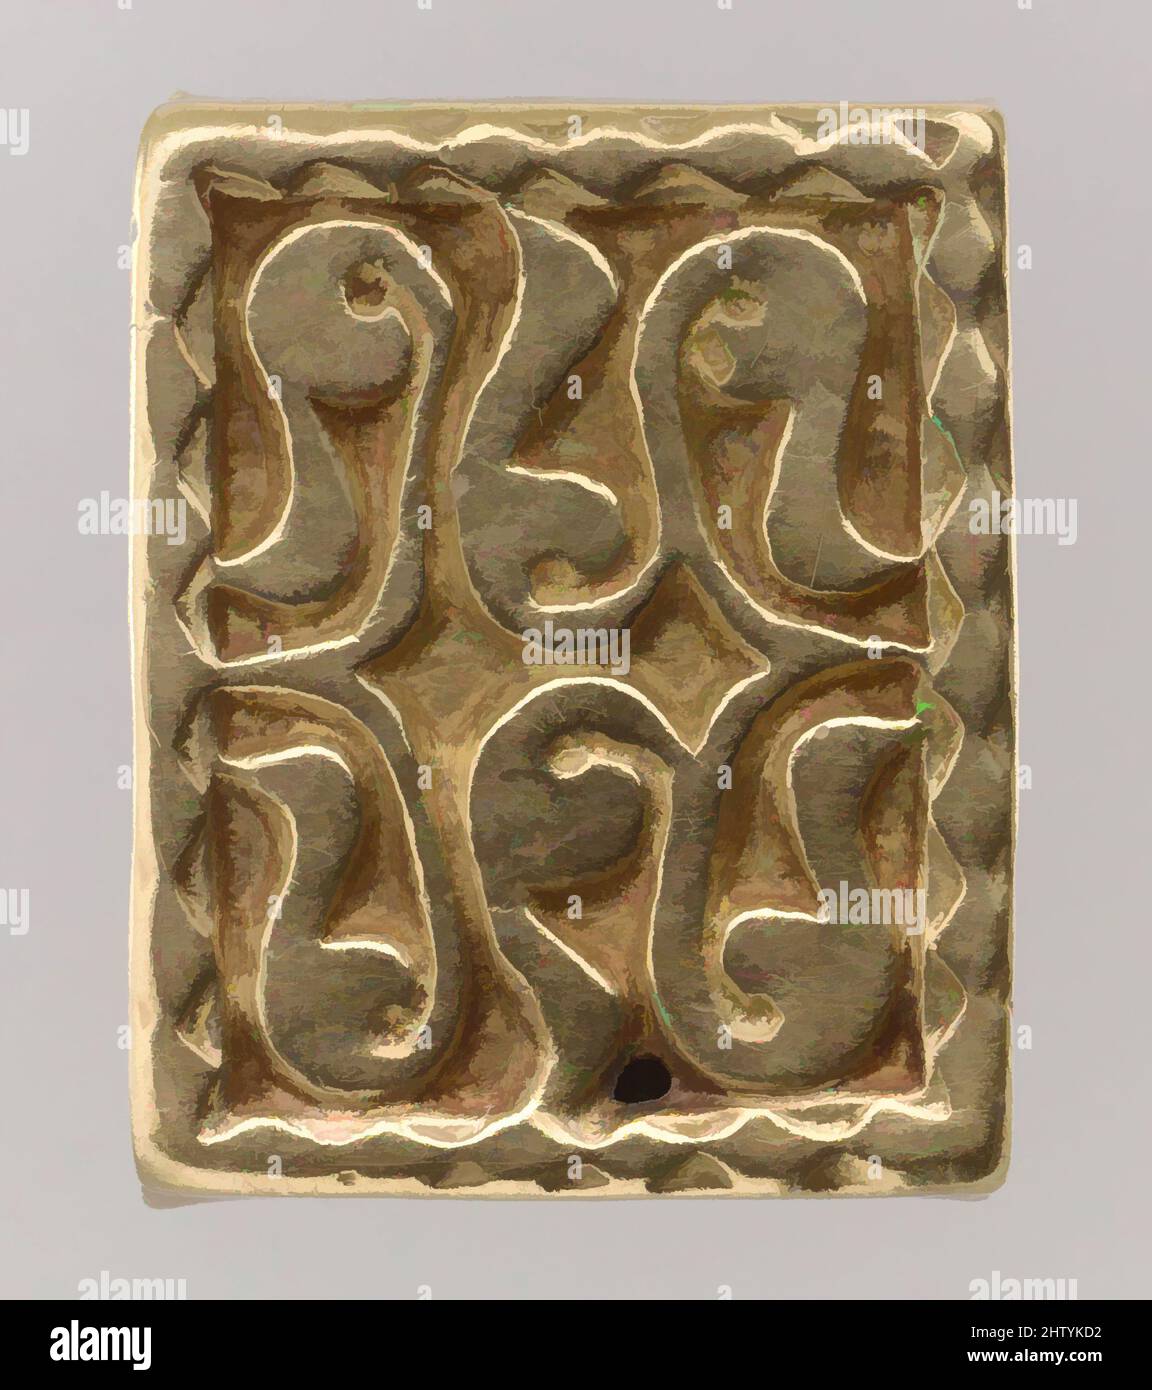 Art inspired by Gold Slide for a Belt, 700s, Avar, Gold, cast., 1 5/16 × 1 × 3/8 in., 1 Troy Ounces (3.3 × 2.6 × 1 cm, 40g), Metalwork-Gold, The treasure contains an array of belt fittings, some elaborately decorated, some unfinished or defectively cast. Some show no signs of use, Classic works modernized by Artotop with a splash of modernity. Shapes, color and value, eye-catching visual impact on art. Emotions through freedom of artworks in a contemporary way. A timeless message pursuing a wildly creative new direction. Artists turning to the digital medium and creating the Artotop NFT Stock Photo